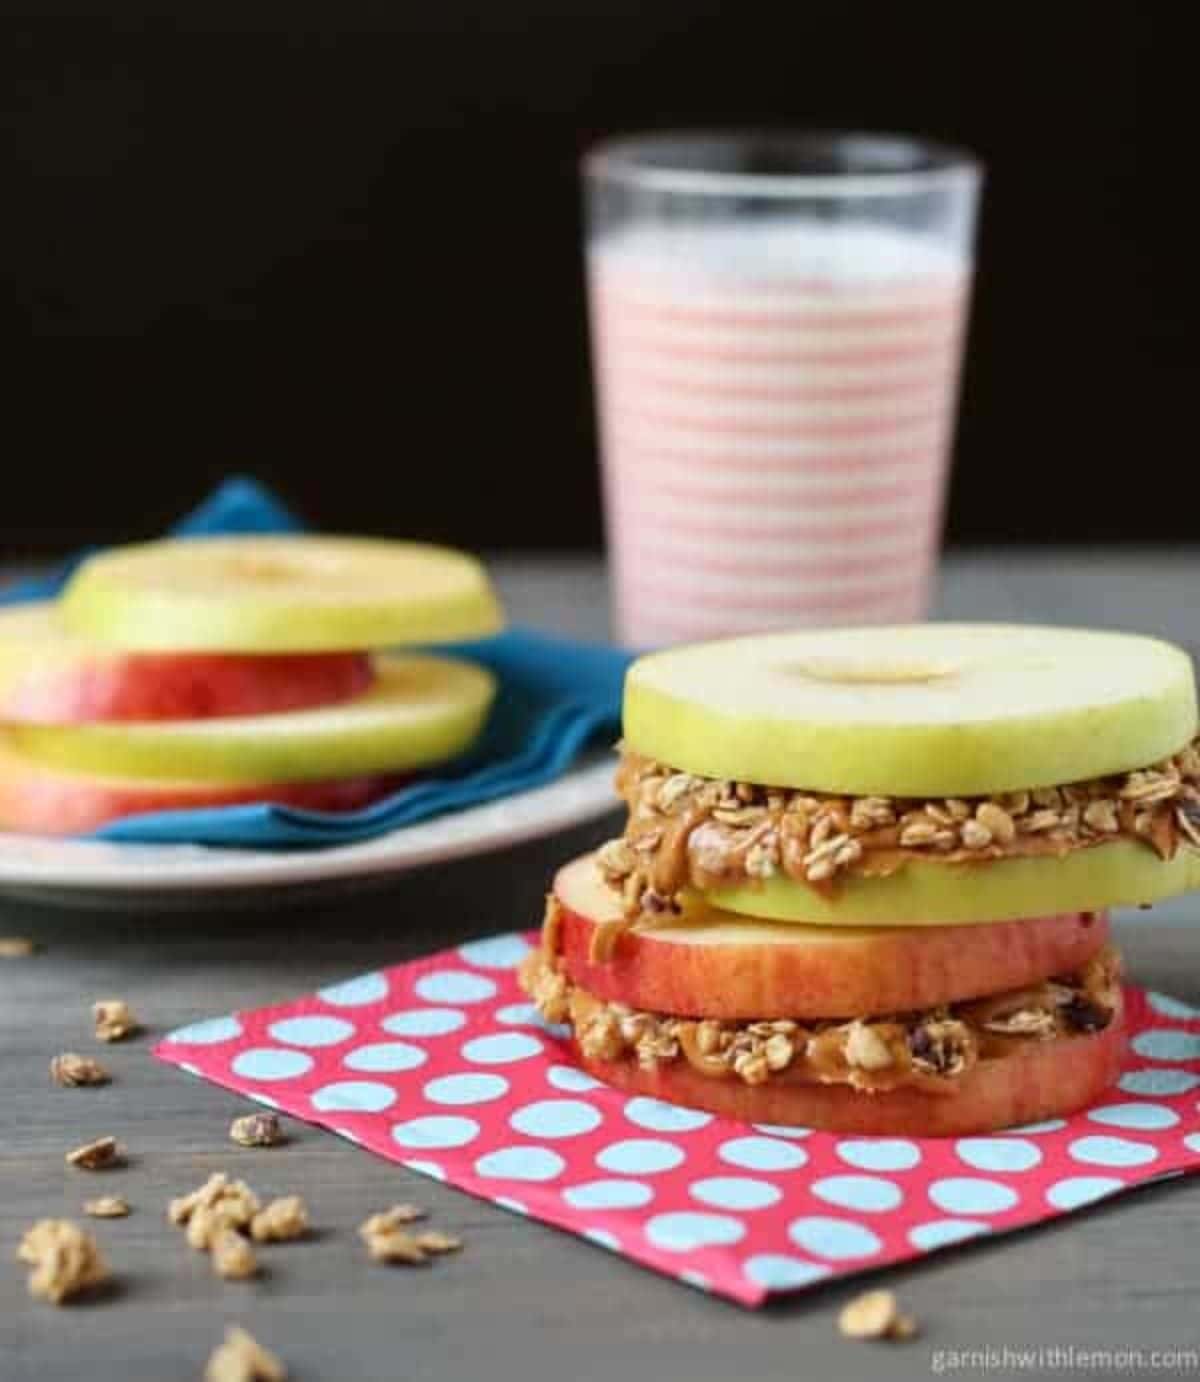 Apple sandwiches with peanut butter and granola on a table.